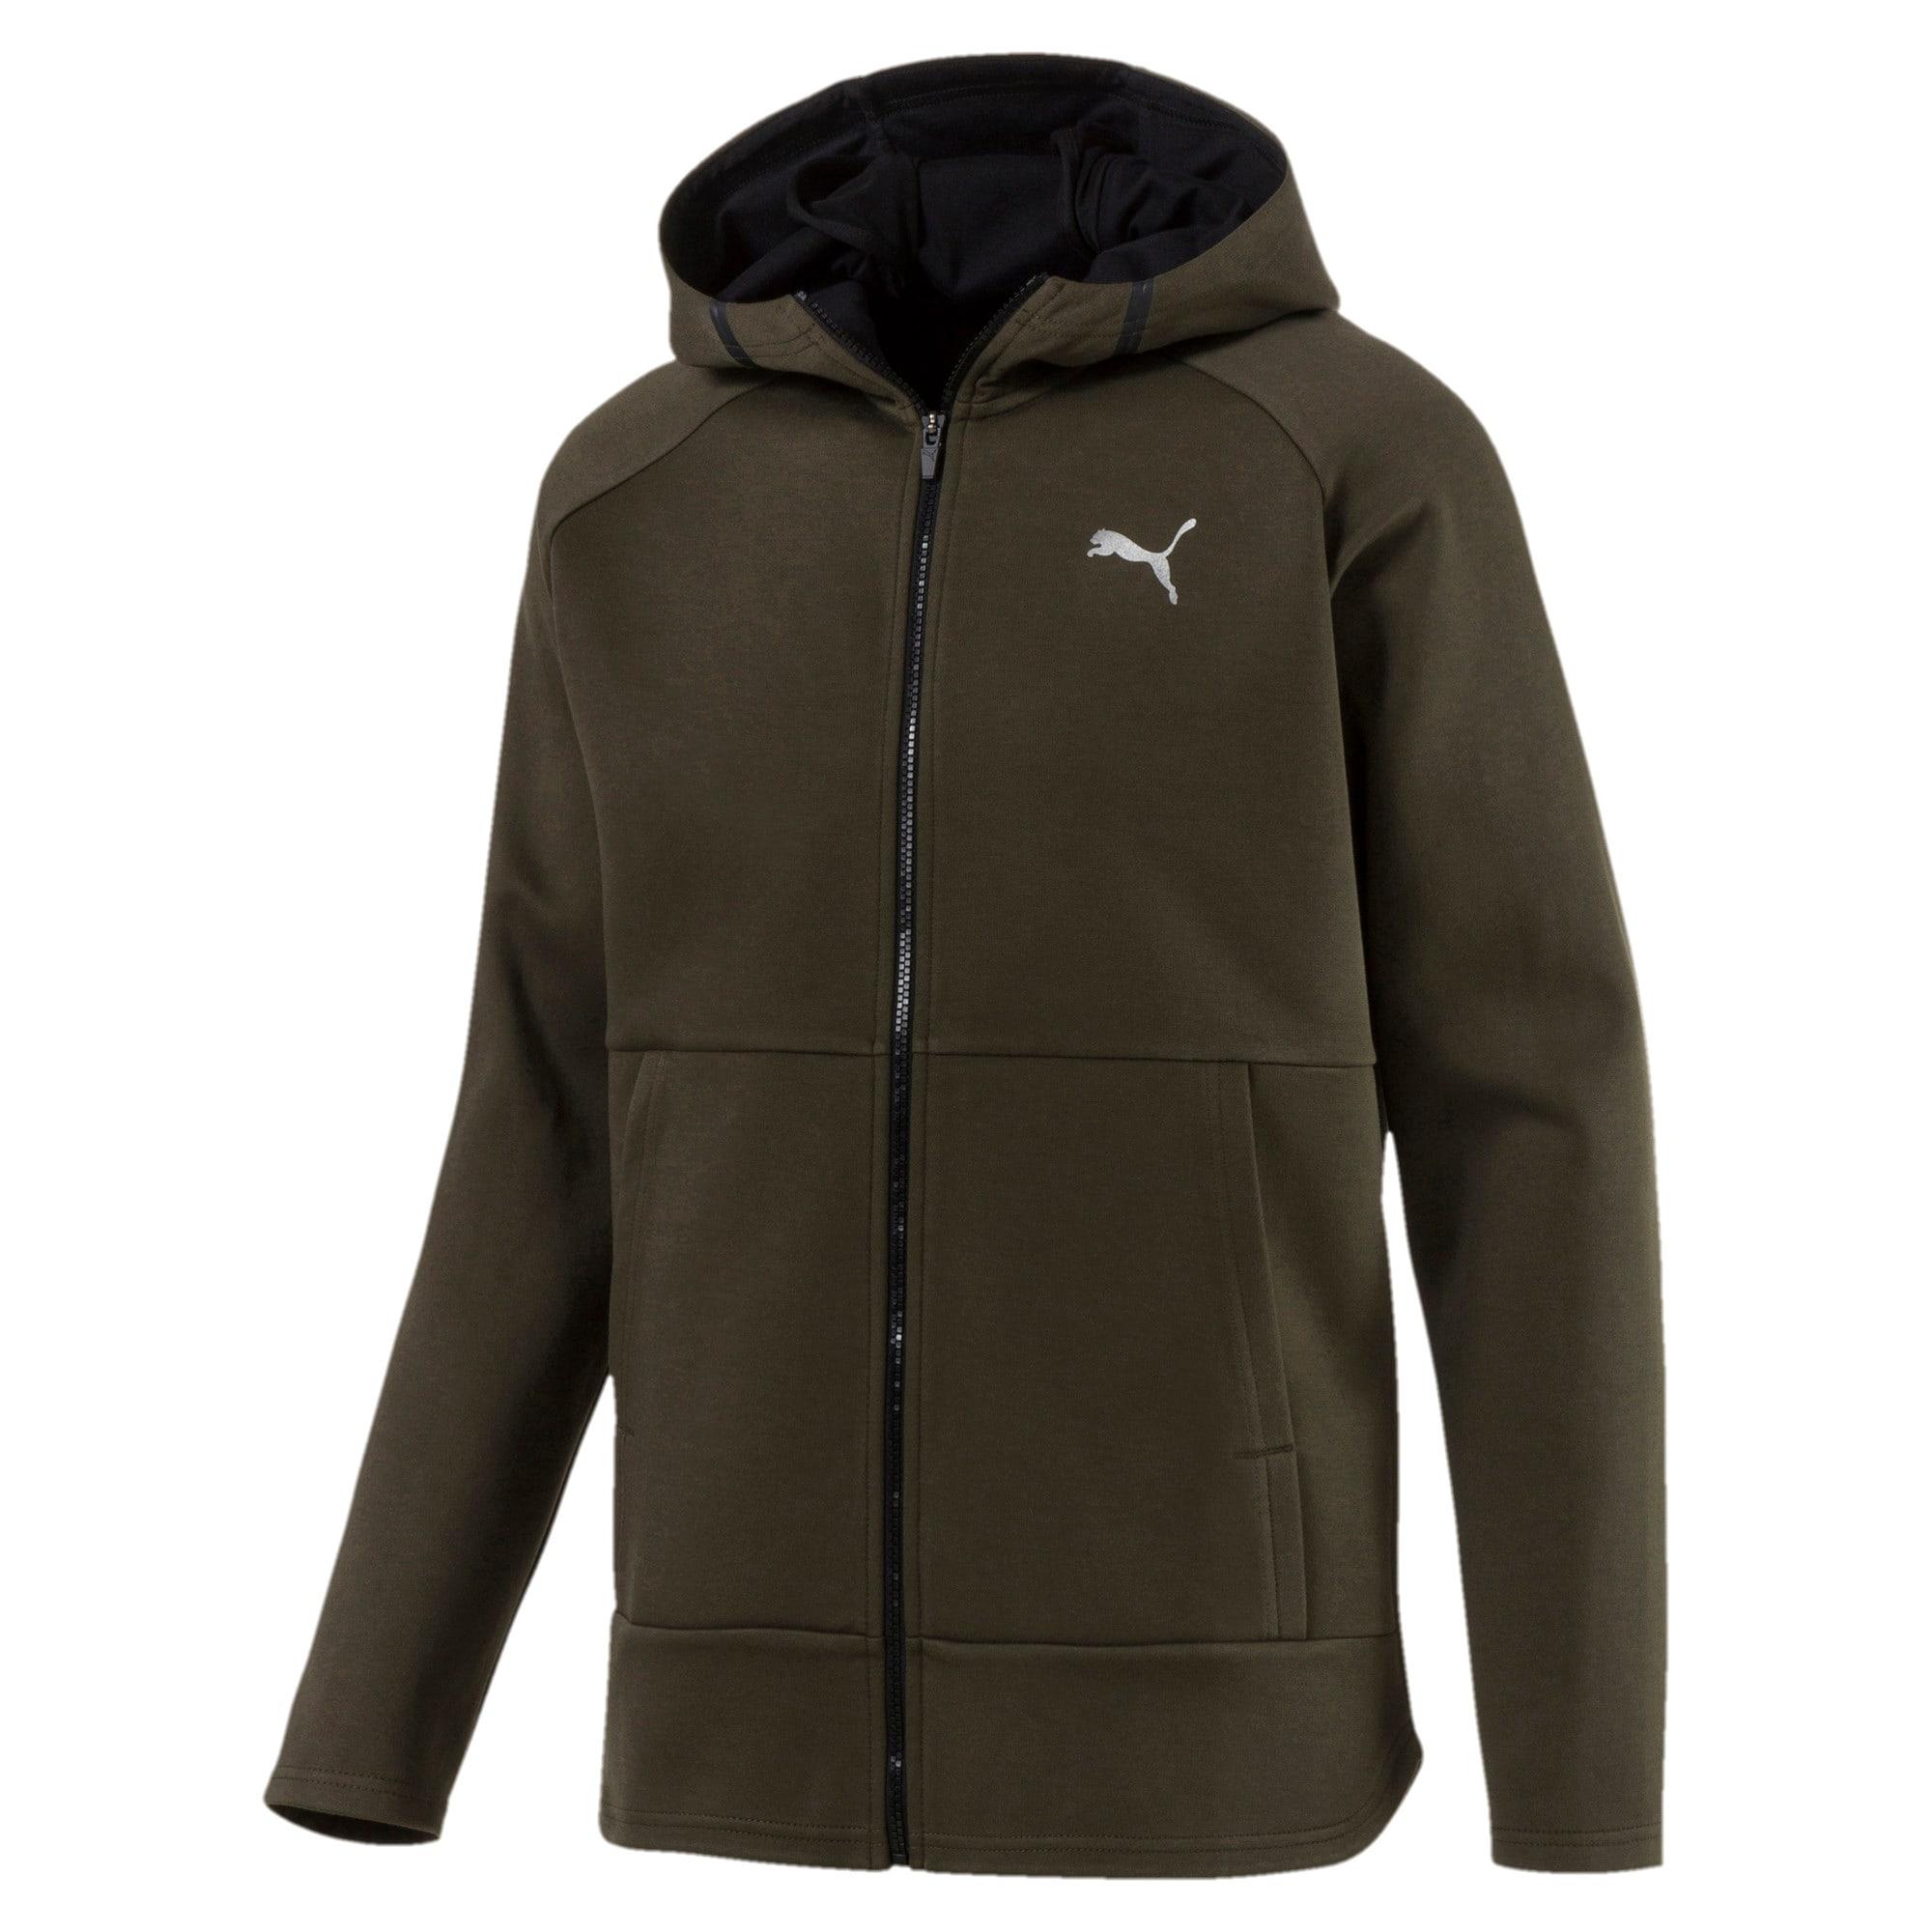 PUMA Cotton Bnd Tech Protect Zip-up Hooded Men's Jacket in Forest Night ...